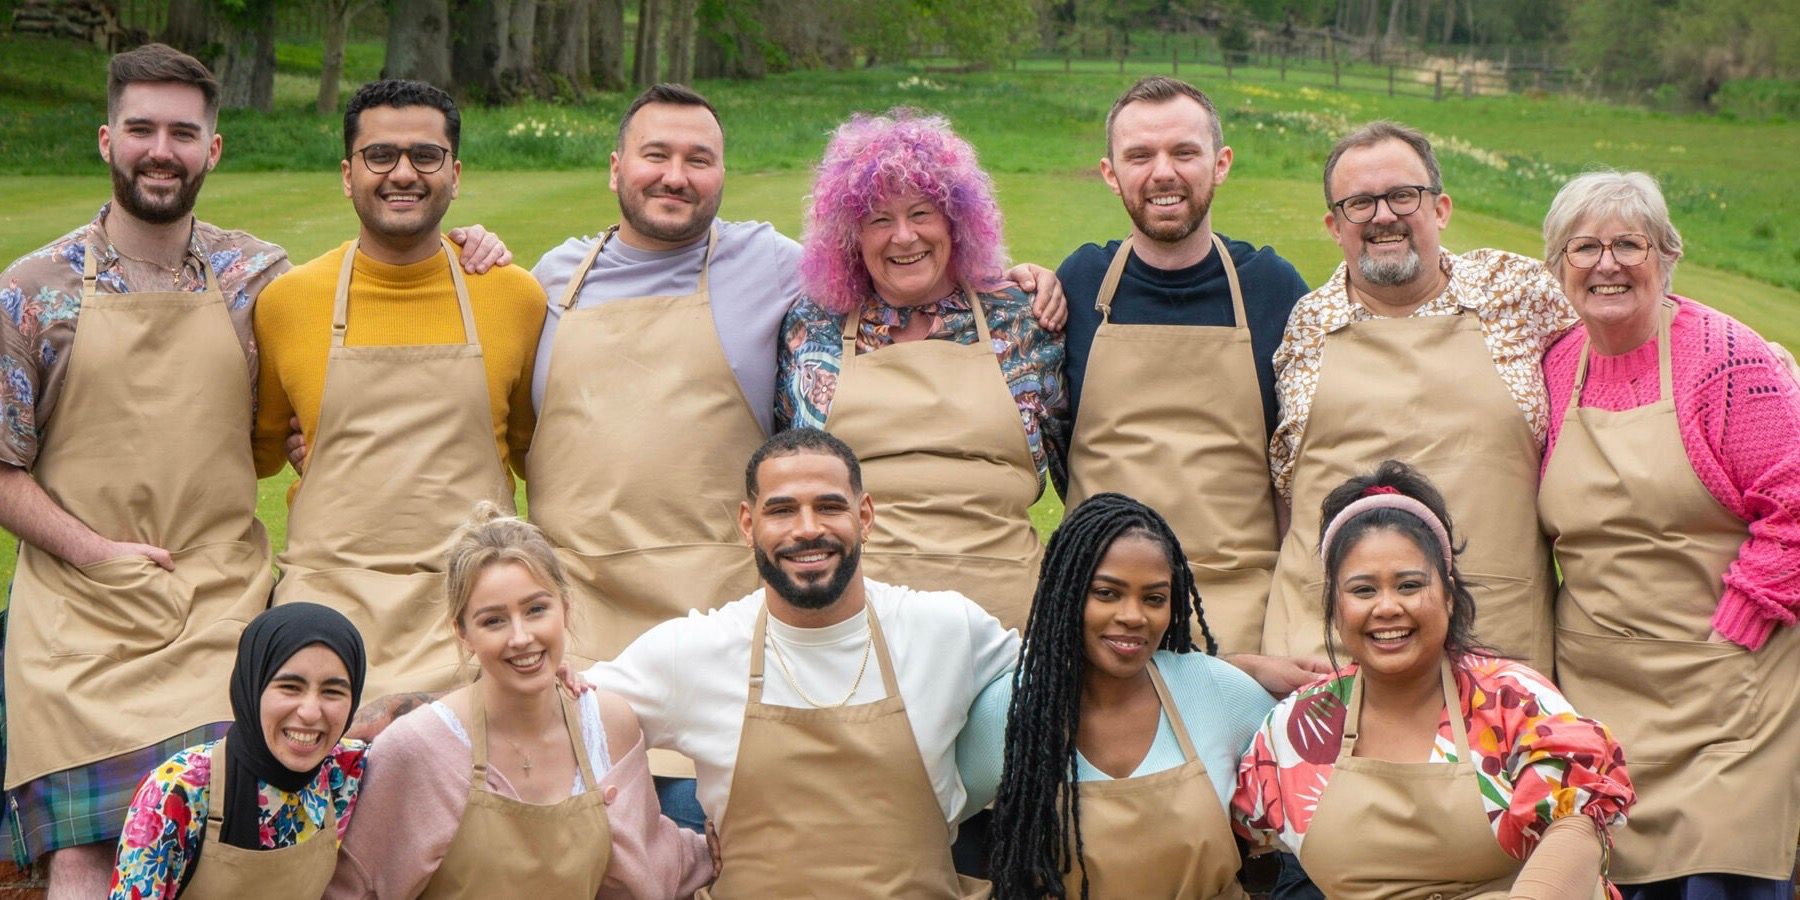 The Great British Baking Show Season 13 Cast group shot with aprons